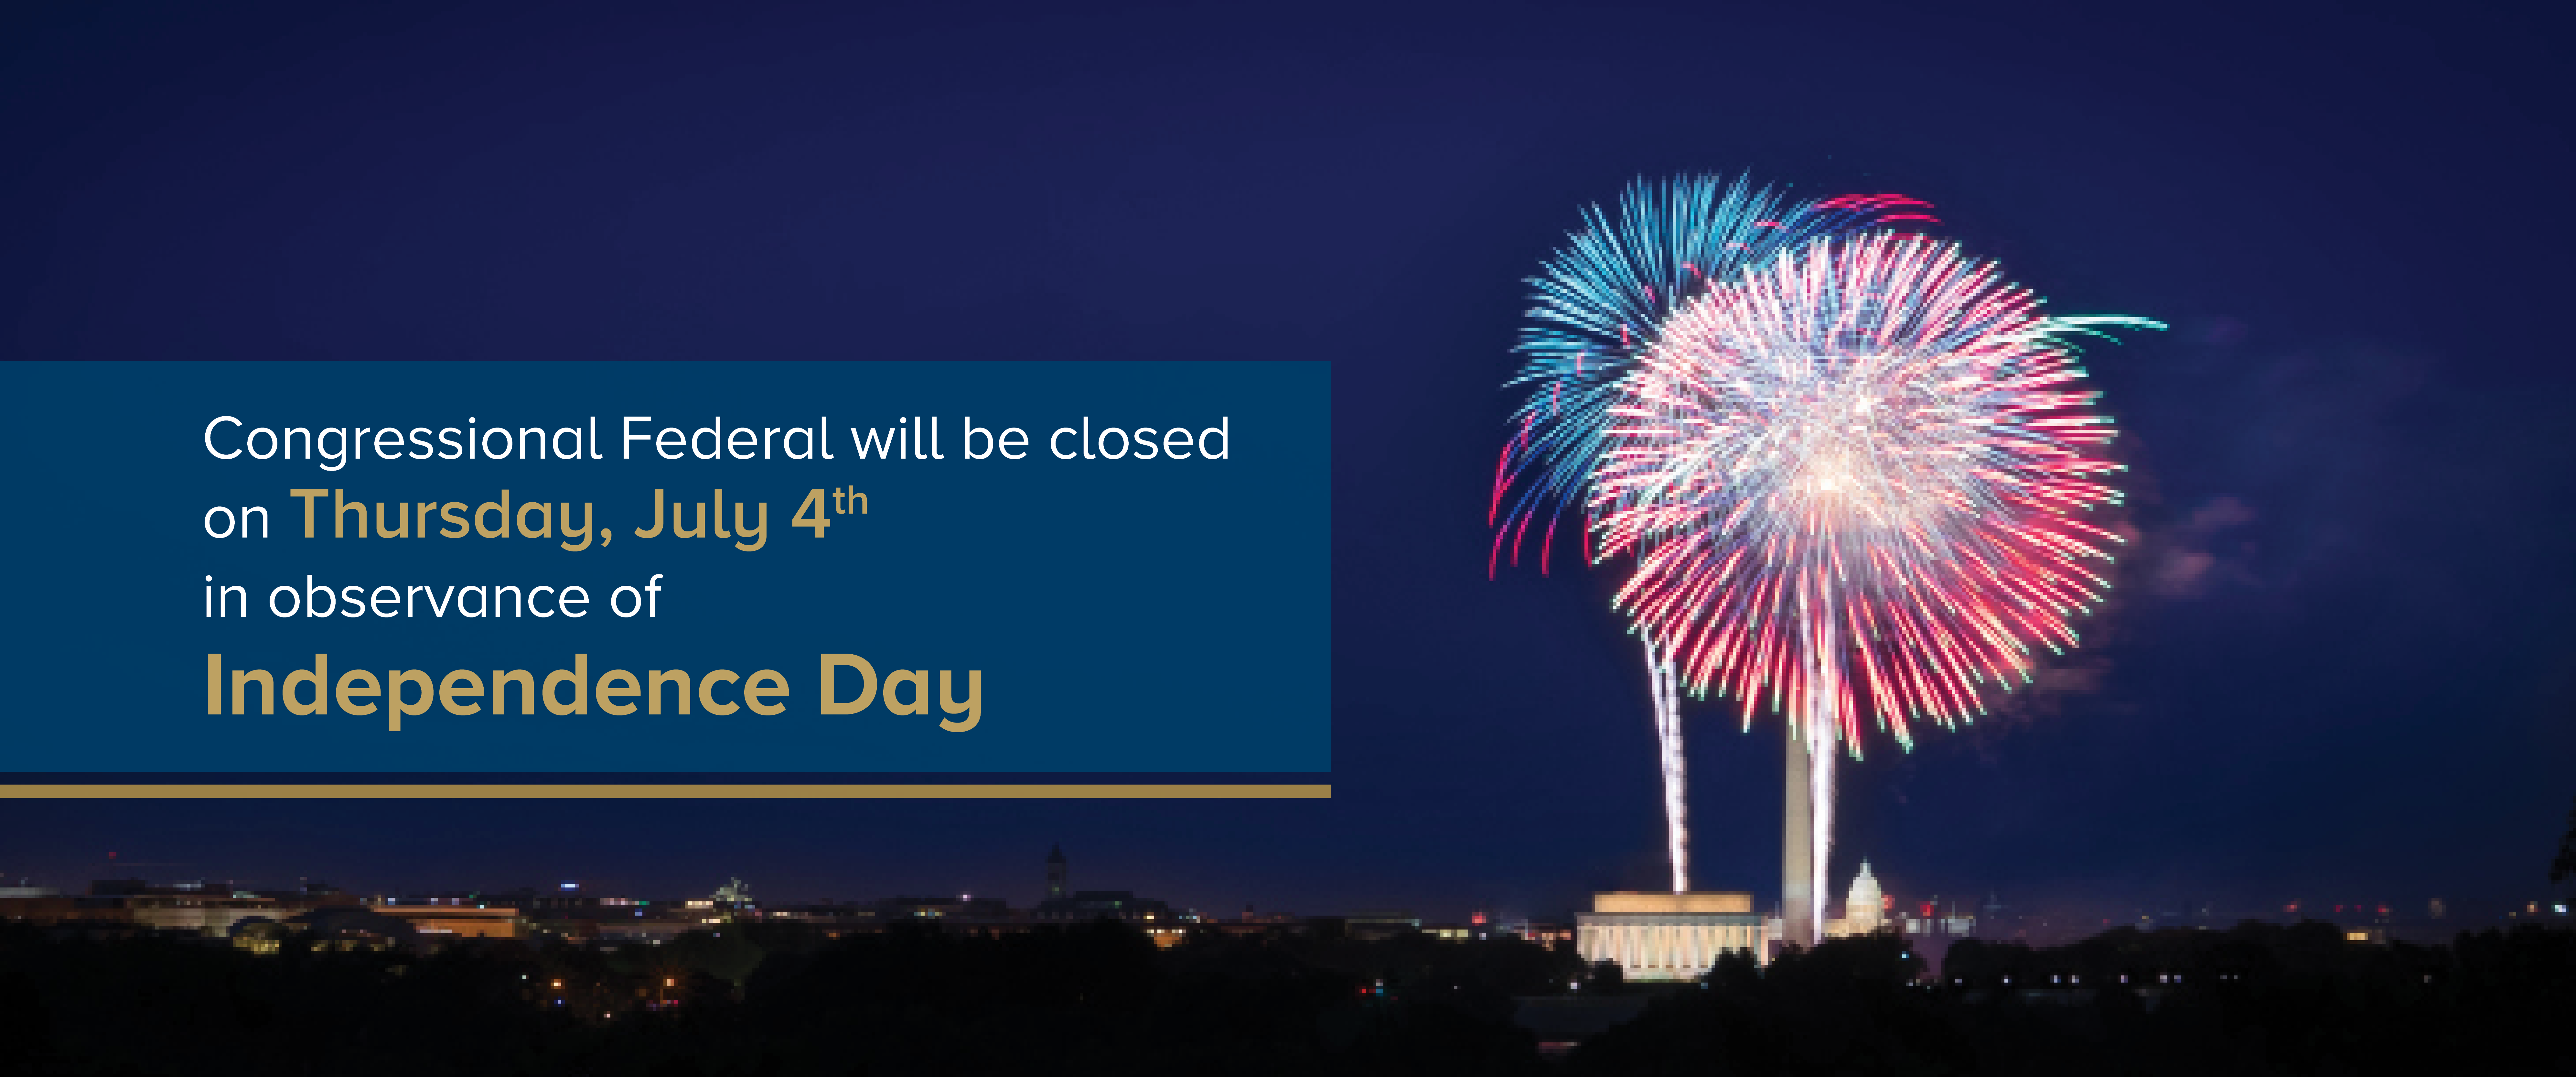 Congressional Federal will be closed on Thursday, July 4th in observance of Independence Day